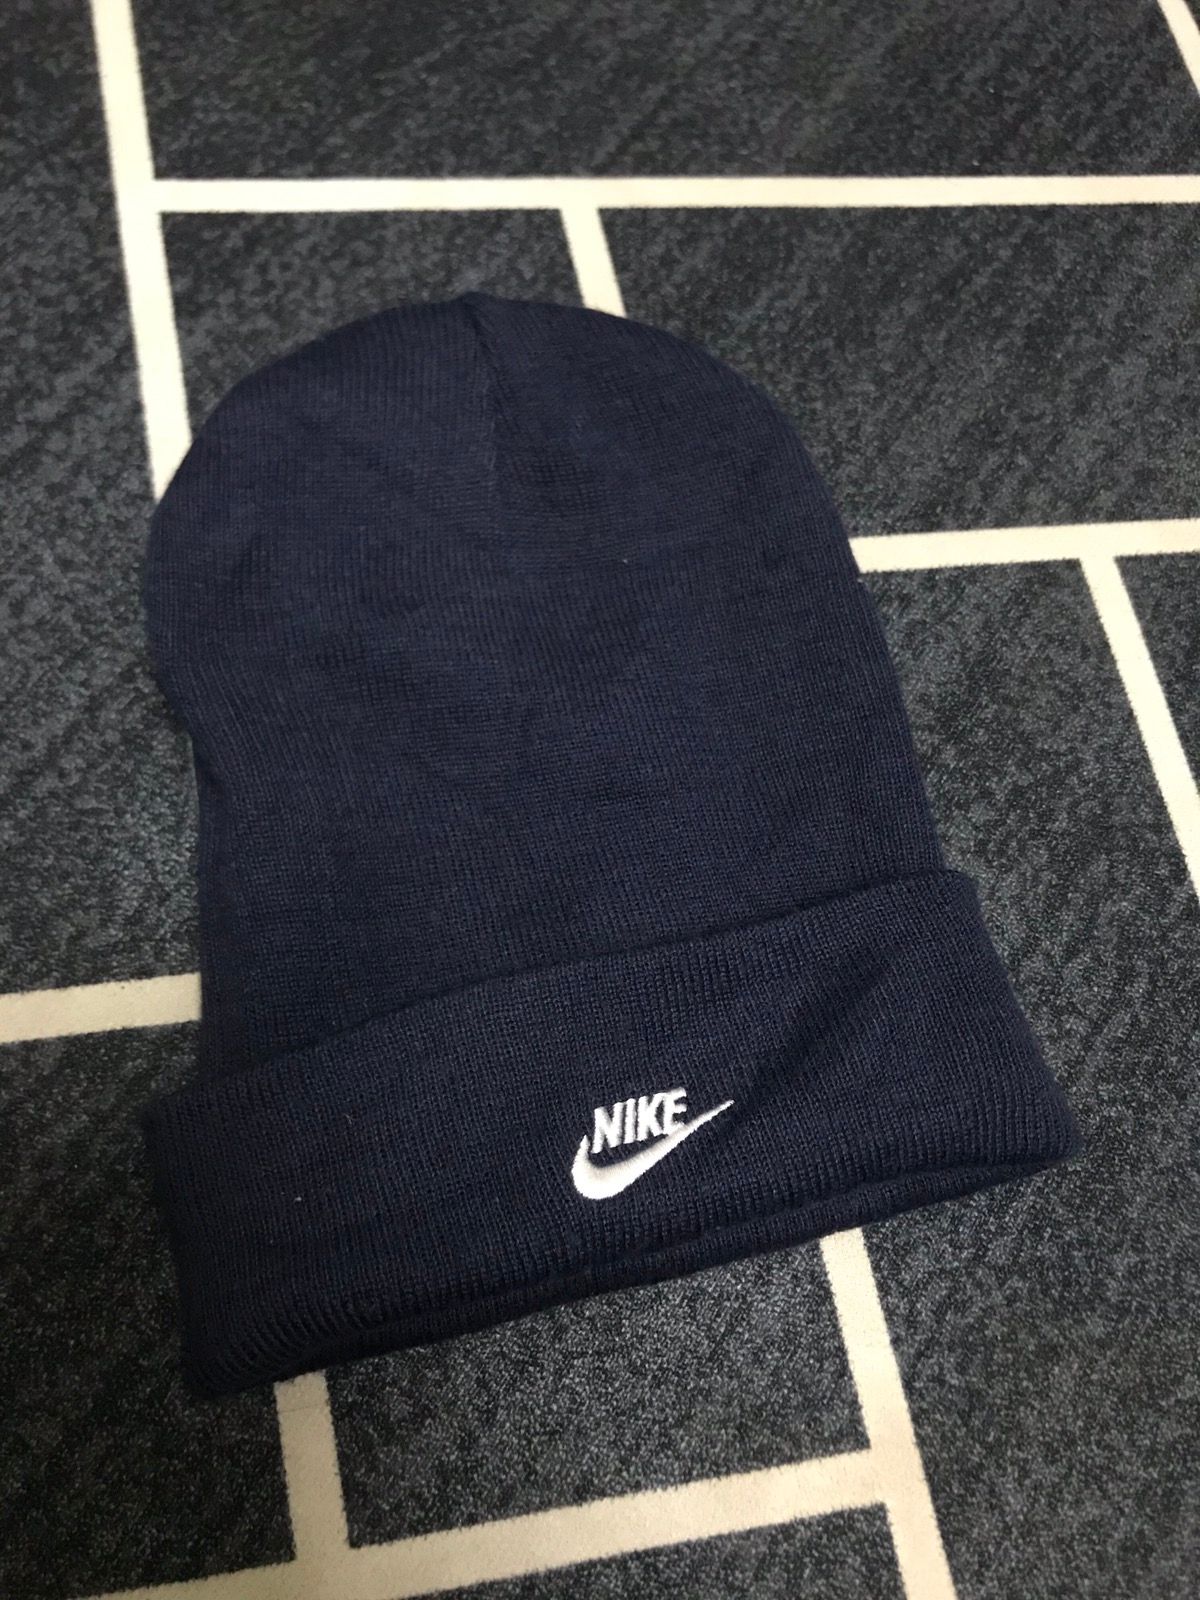 Vintage 90s nike Beanie hats embroided logo reversible - 1